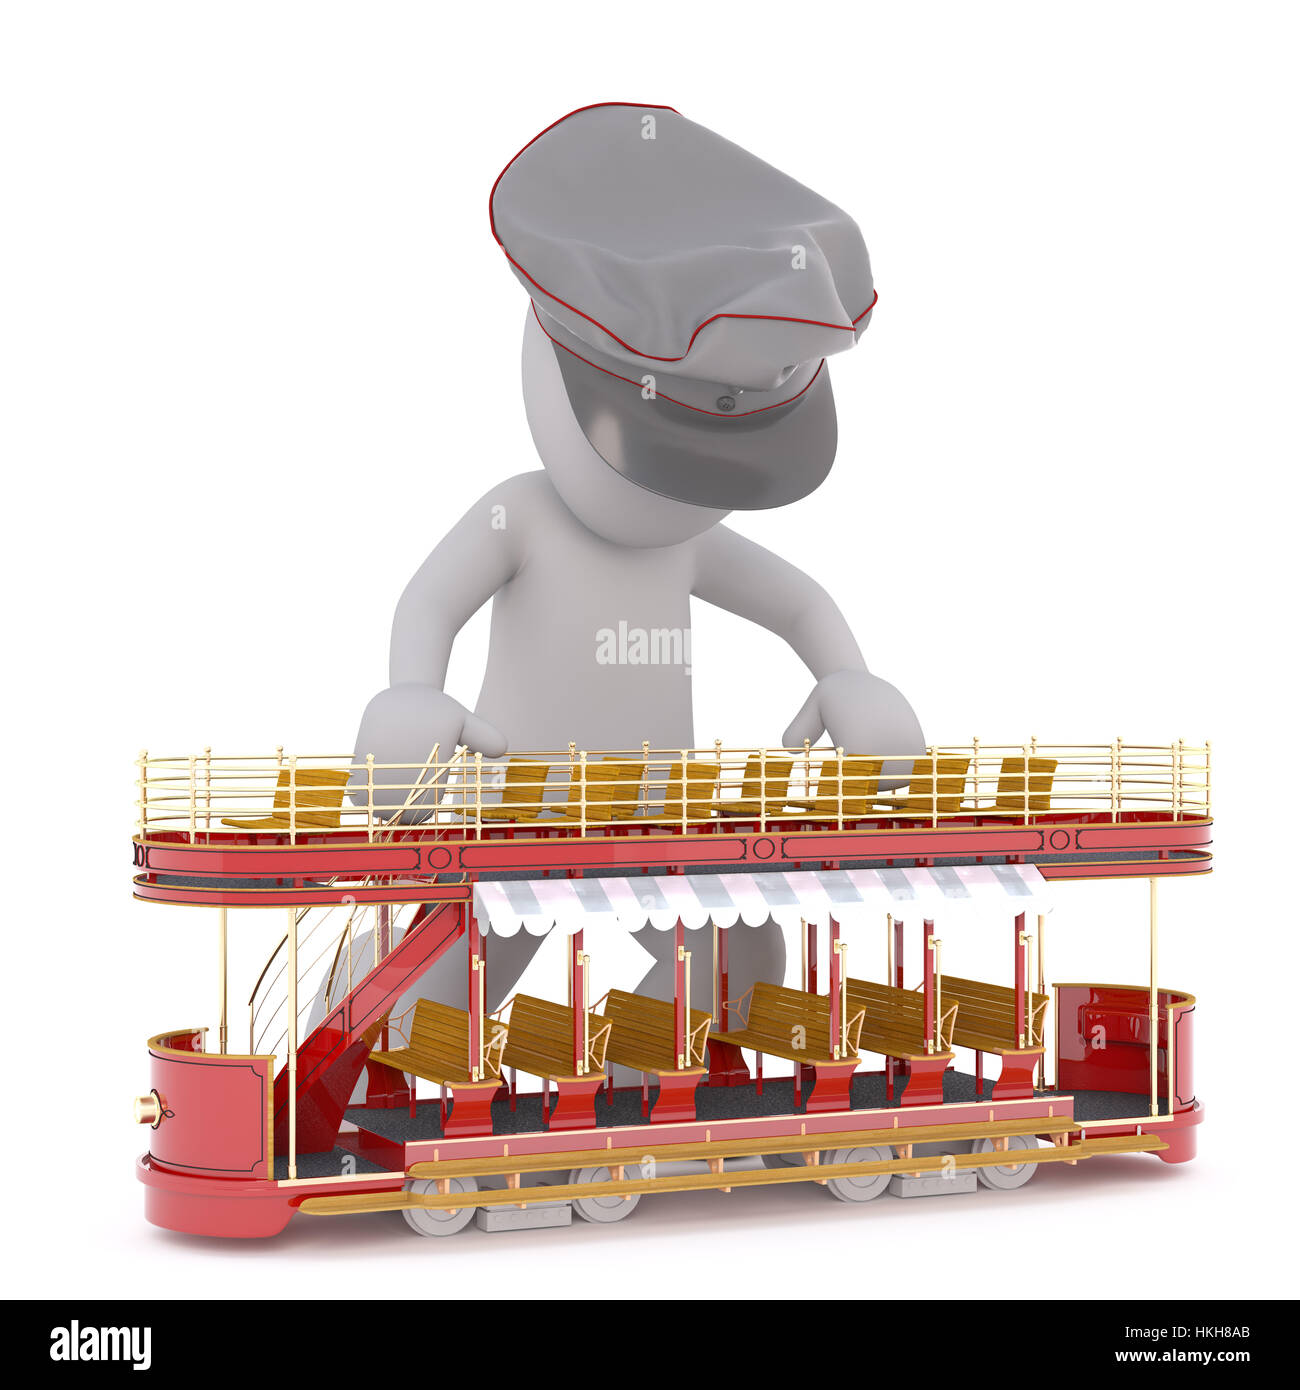 Figure of faceless 3D man tram driver in peaked cap working on small double-decker red sightseeing tram, standing behind it isolated on white backgrou Stock Photo